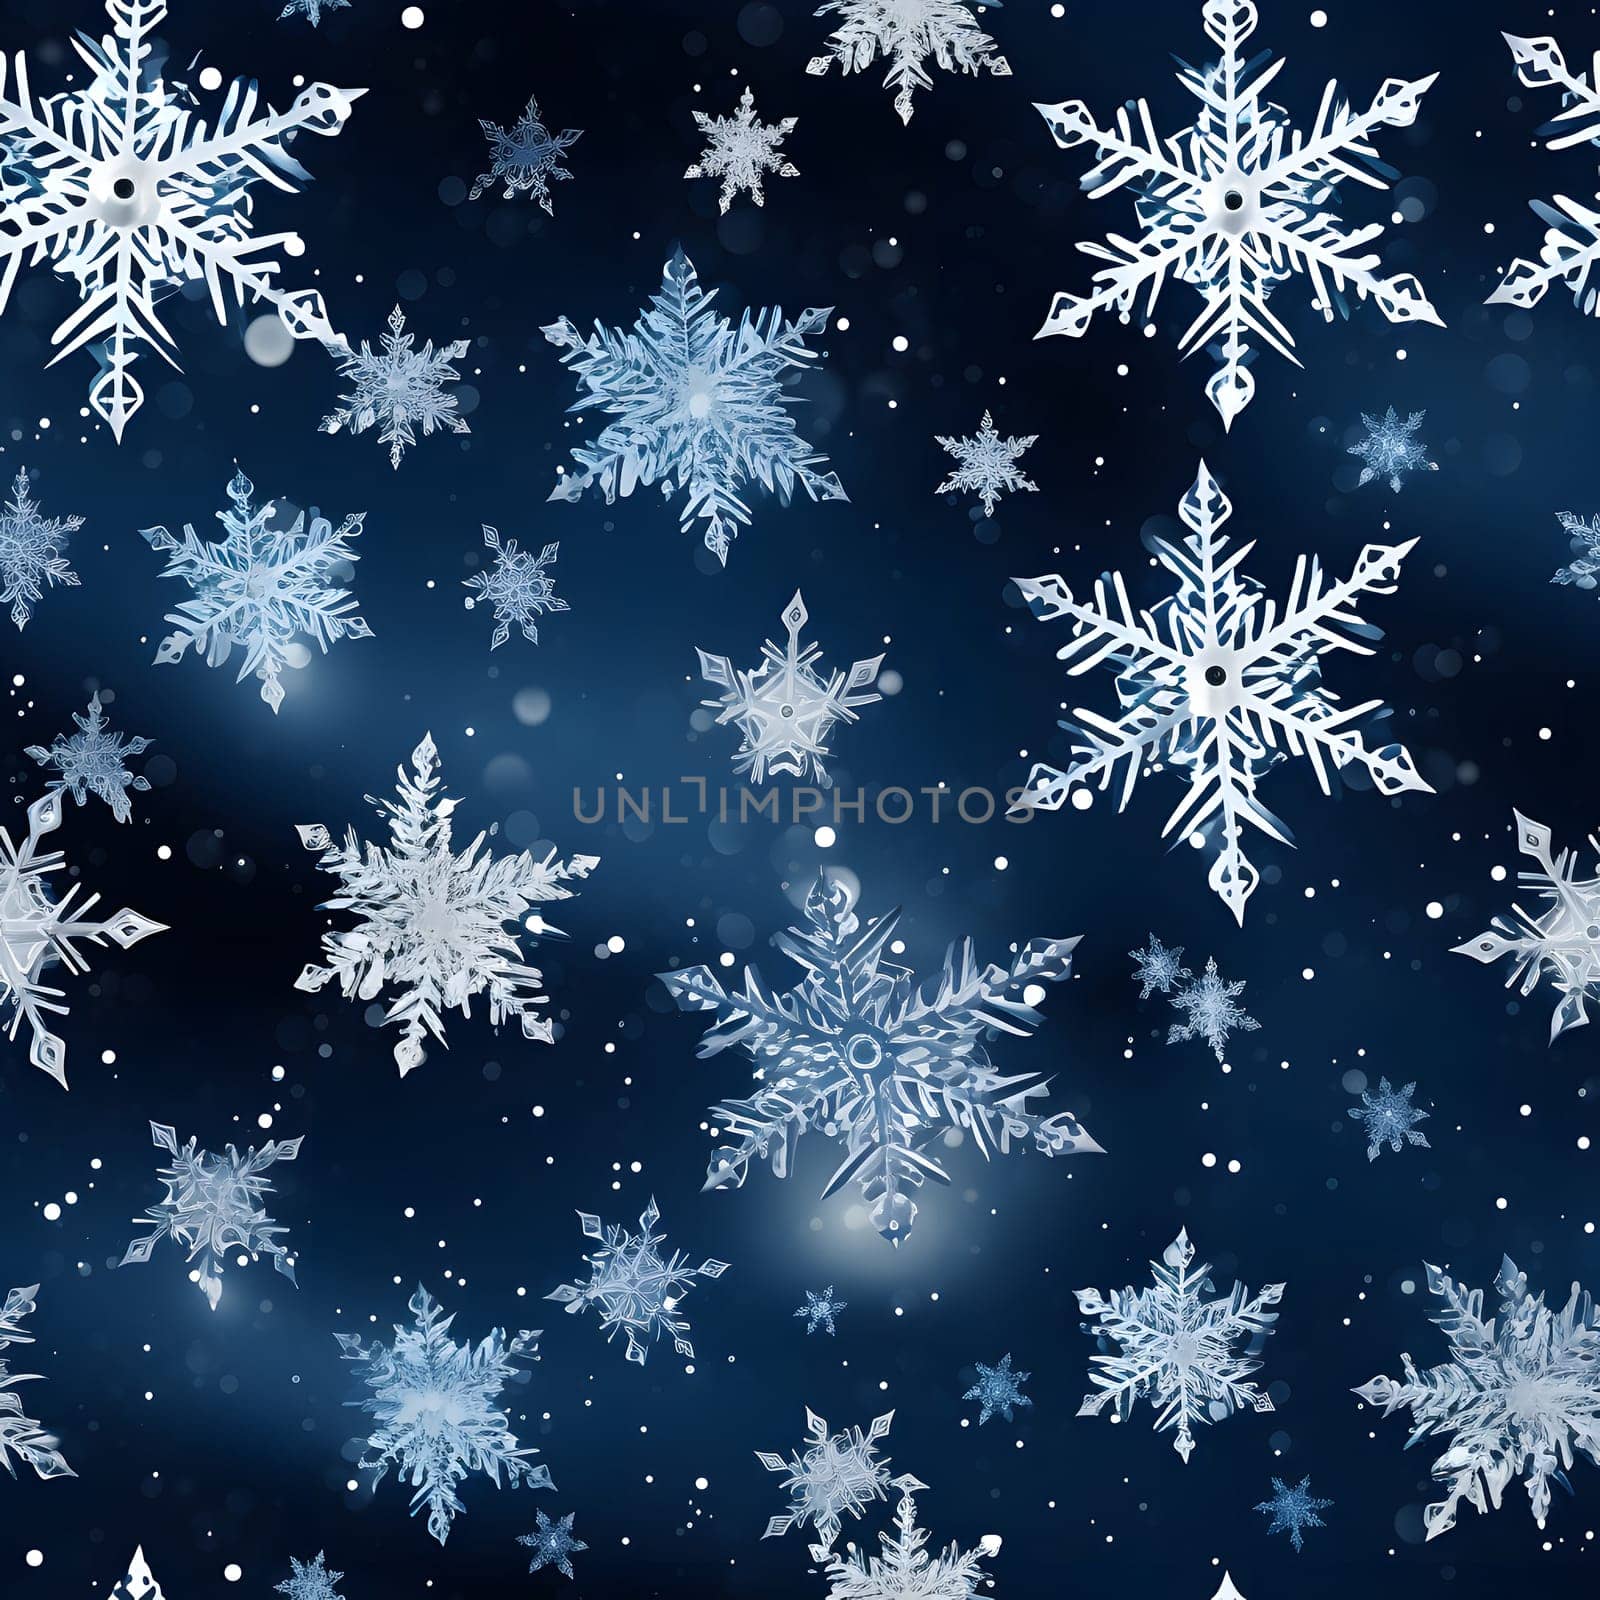 seamless pattern of snowflakes on dark blue background, neural network generated. Not based on any actual scene or pattern.